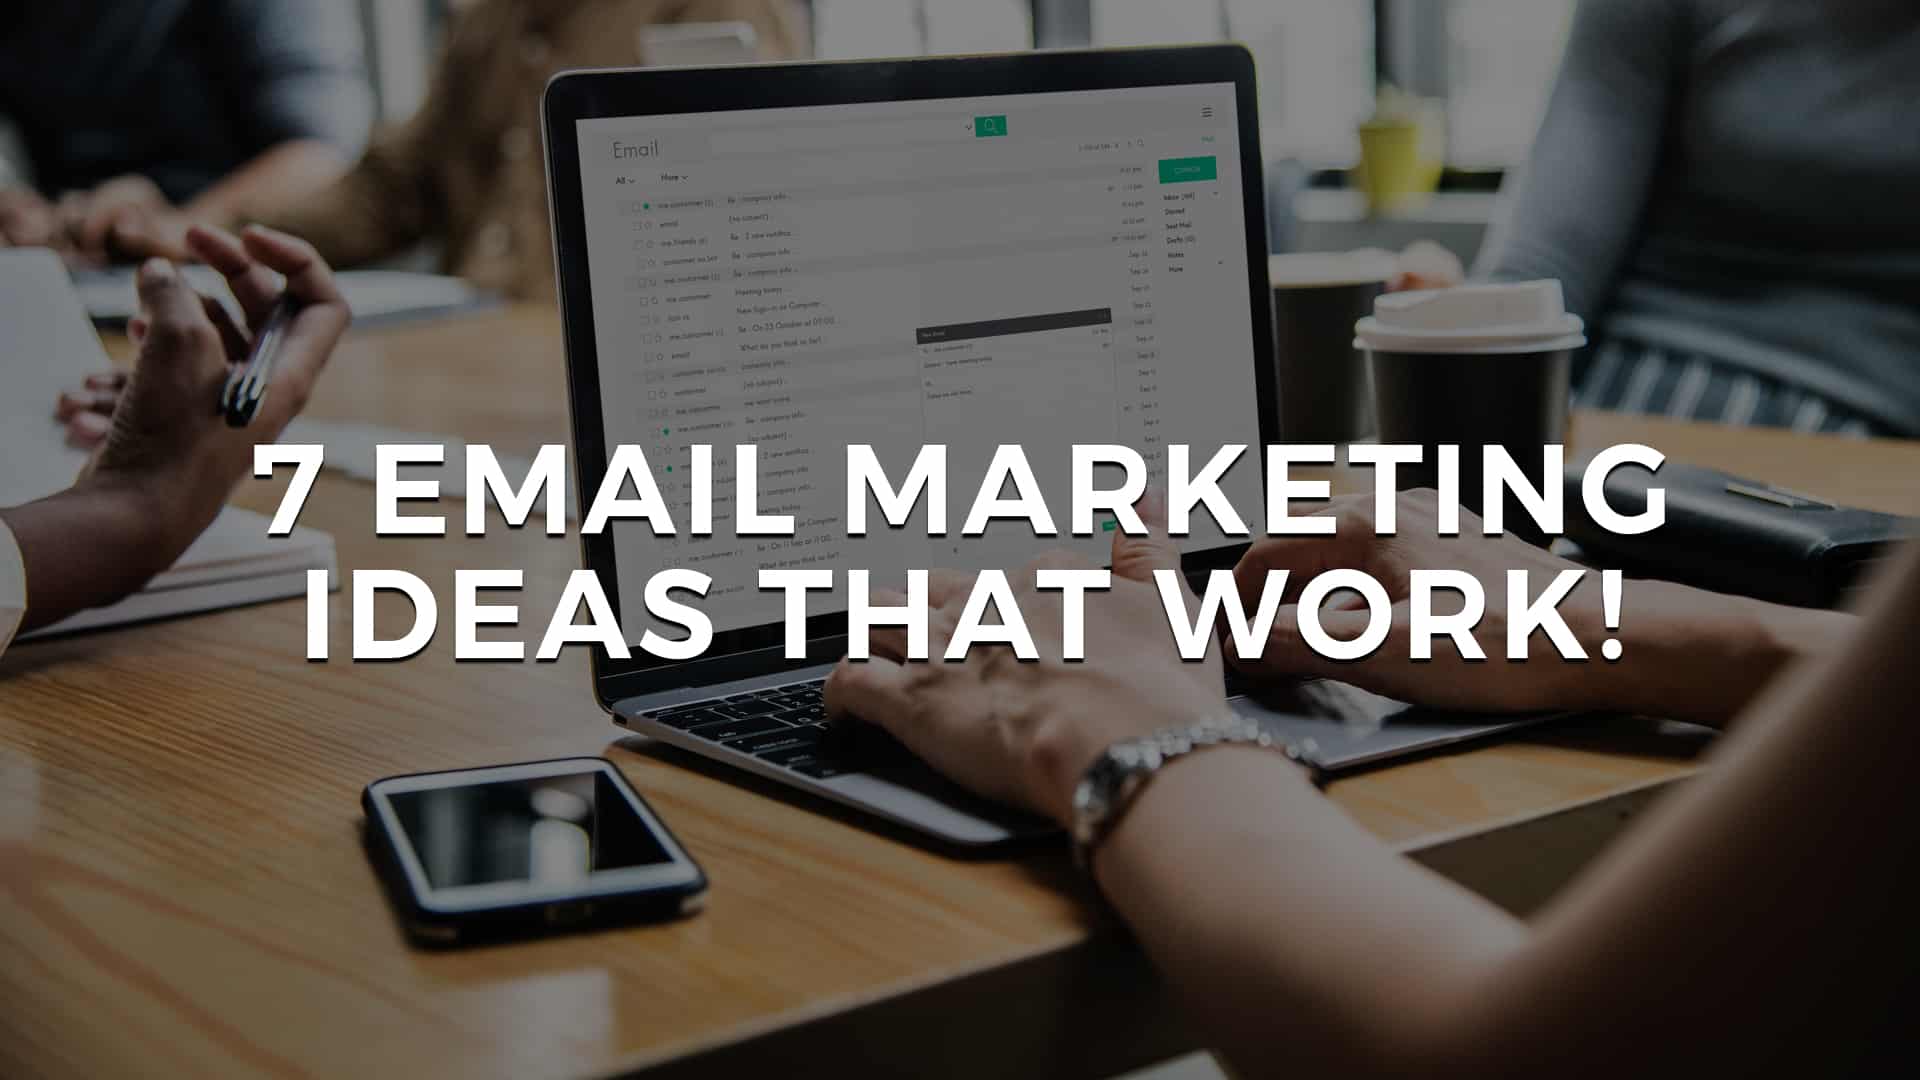 You are currently viewing 7 Email Marketing Ideas that work!